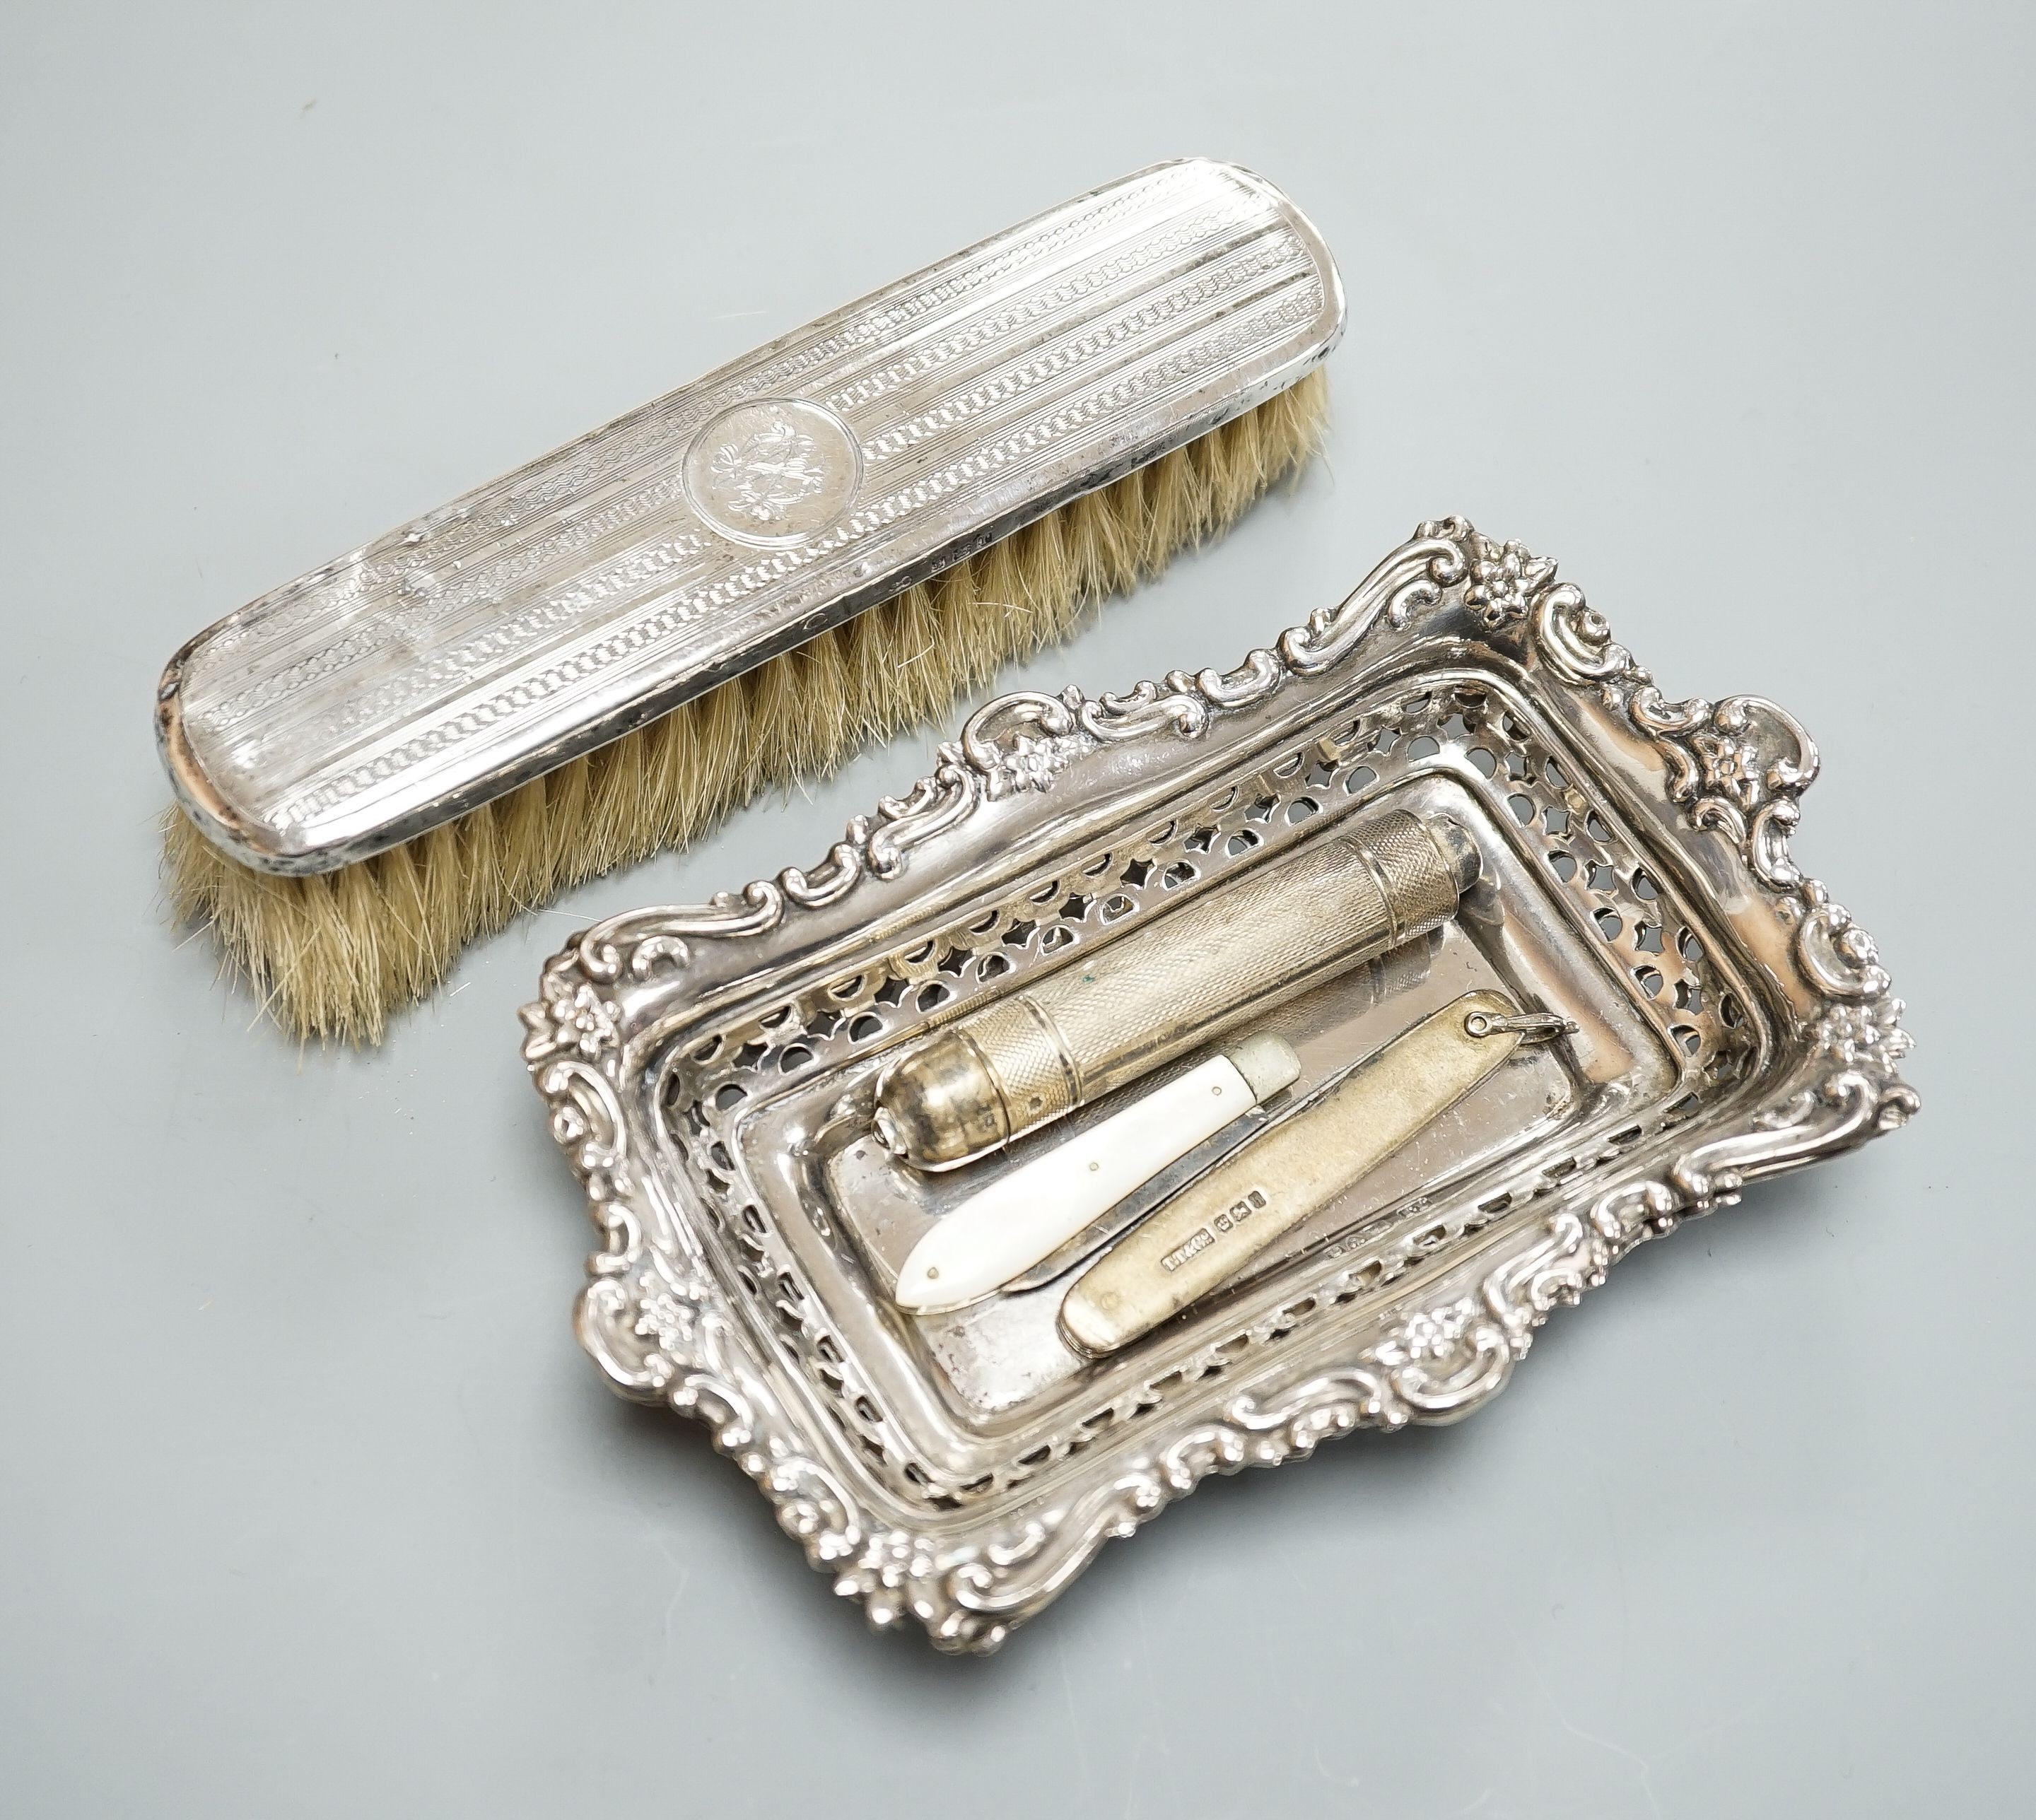 A pair of Edwardian pierced silver bonbon dishes, Chester, 1902, 16.1cm, 4.5oz, a silver and mother of pearl fruit knife, silver cased penknife and silver mounted clothes brush and a modern silver cased pocket torch.